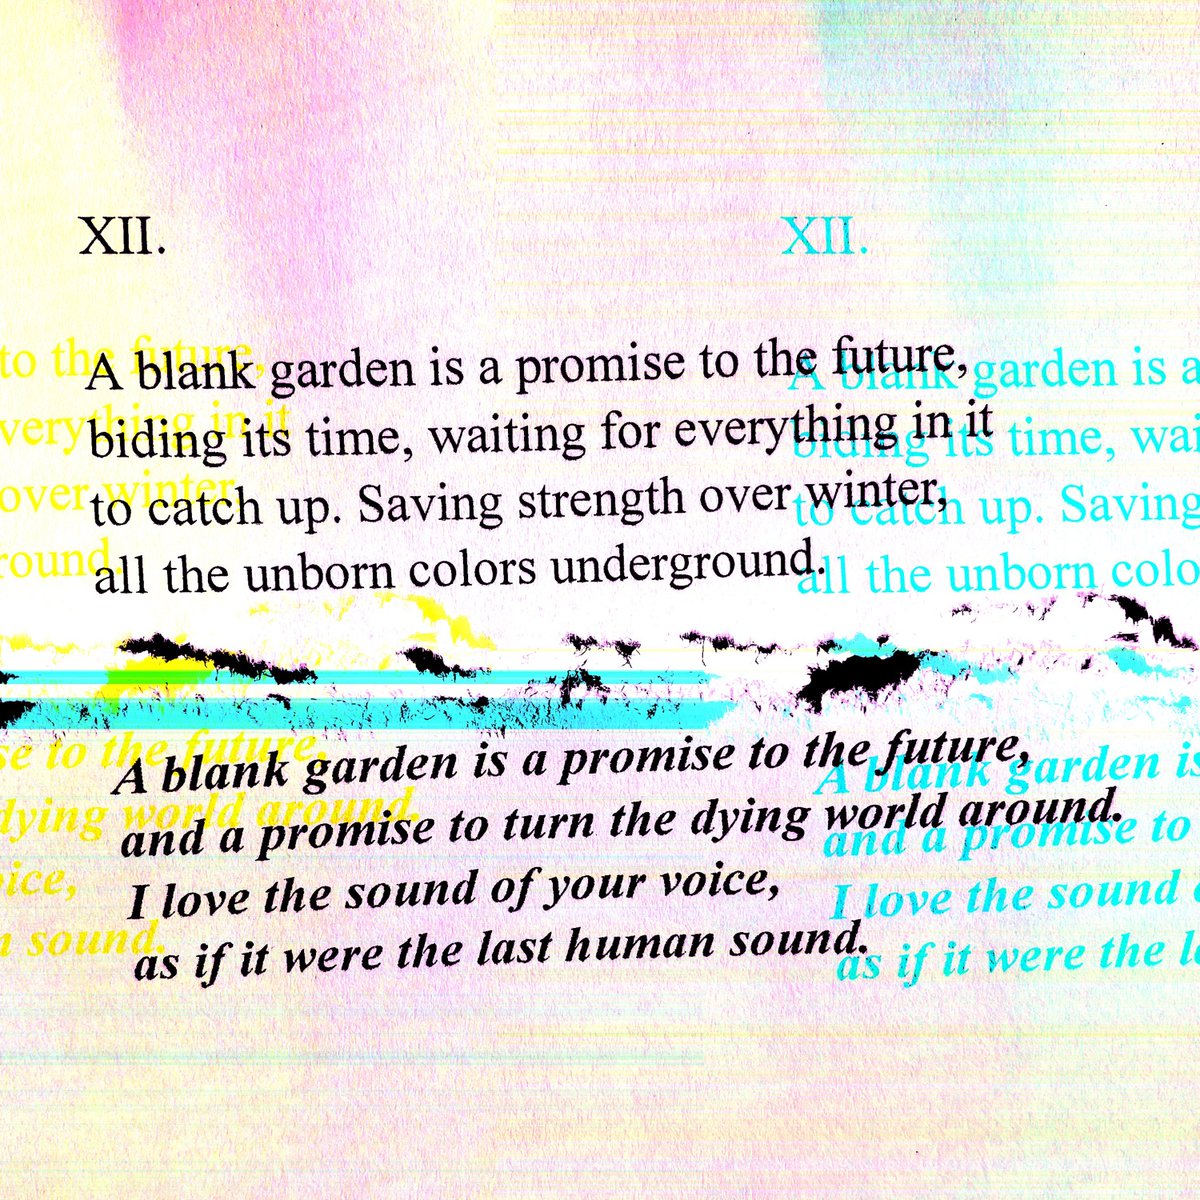 Just re-swapped 5 editions of #Objkt 23251 I didn't realize I still had -- a transhuman translation by me and @technelegy, from O.G. @hicetnunc2000. hicetnunc.xyz/objkt/23251 #Bina48intheGarden